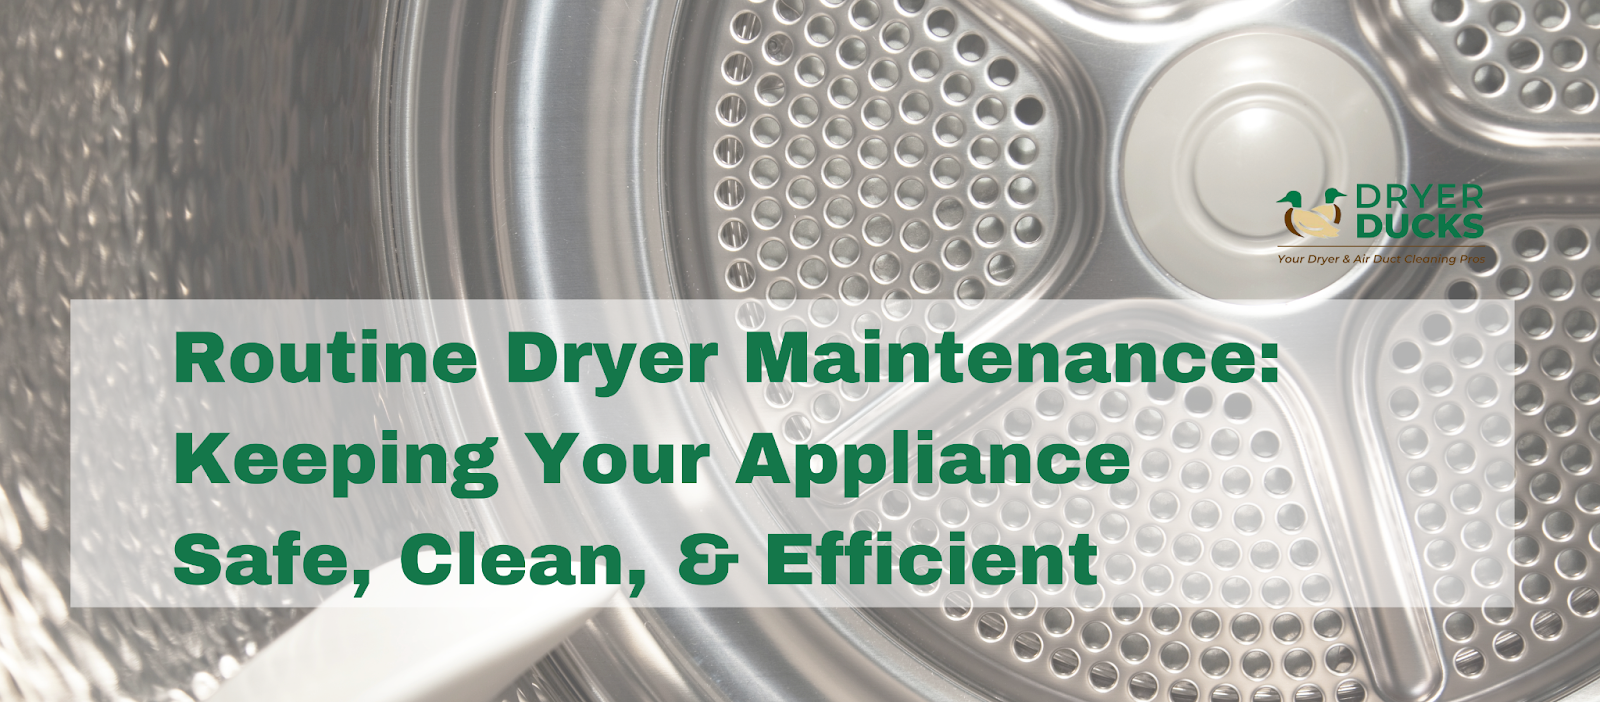 How to Clean Your Dryer, Dryer Maintenance